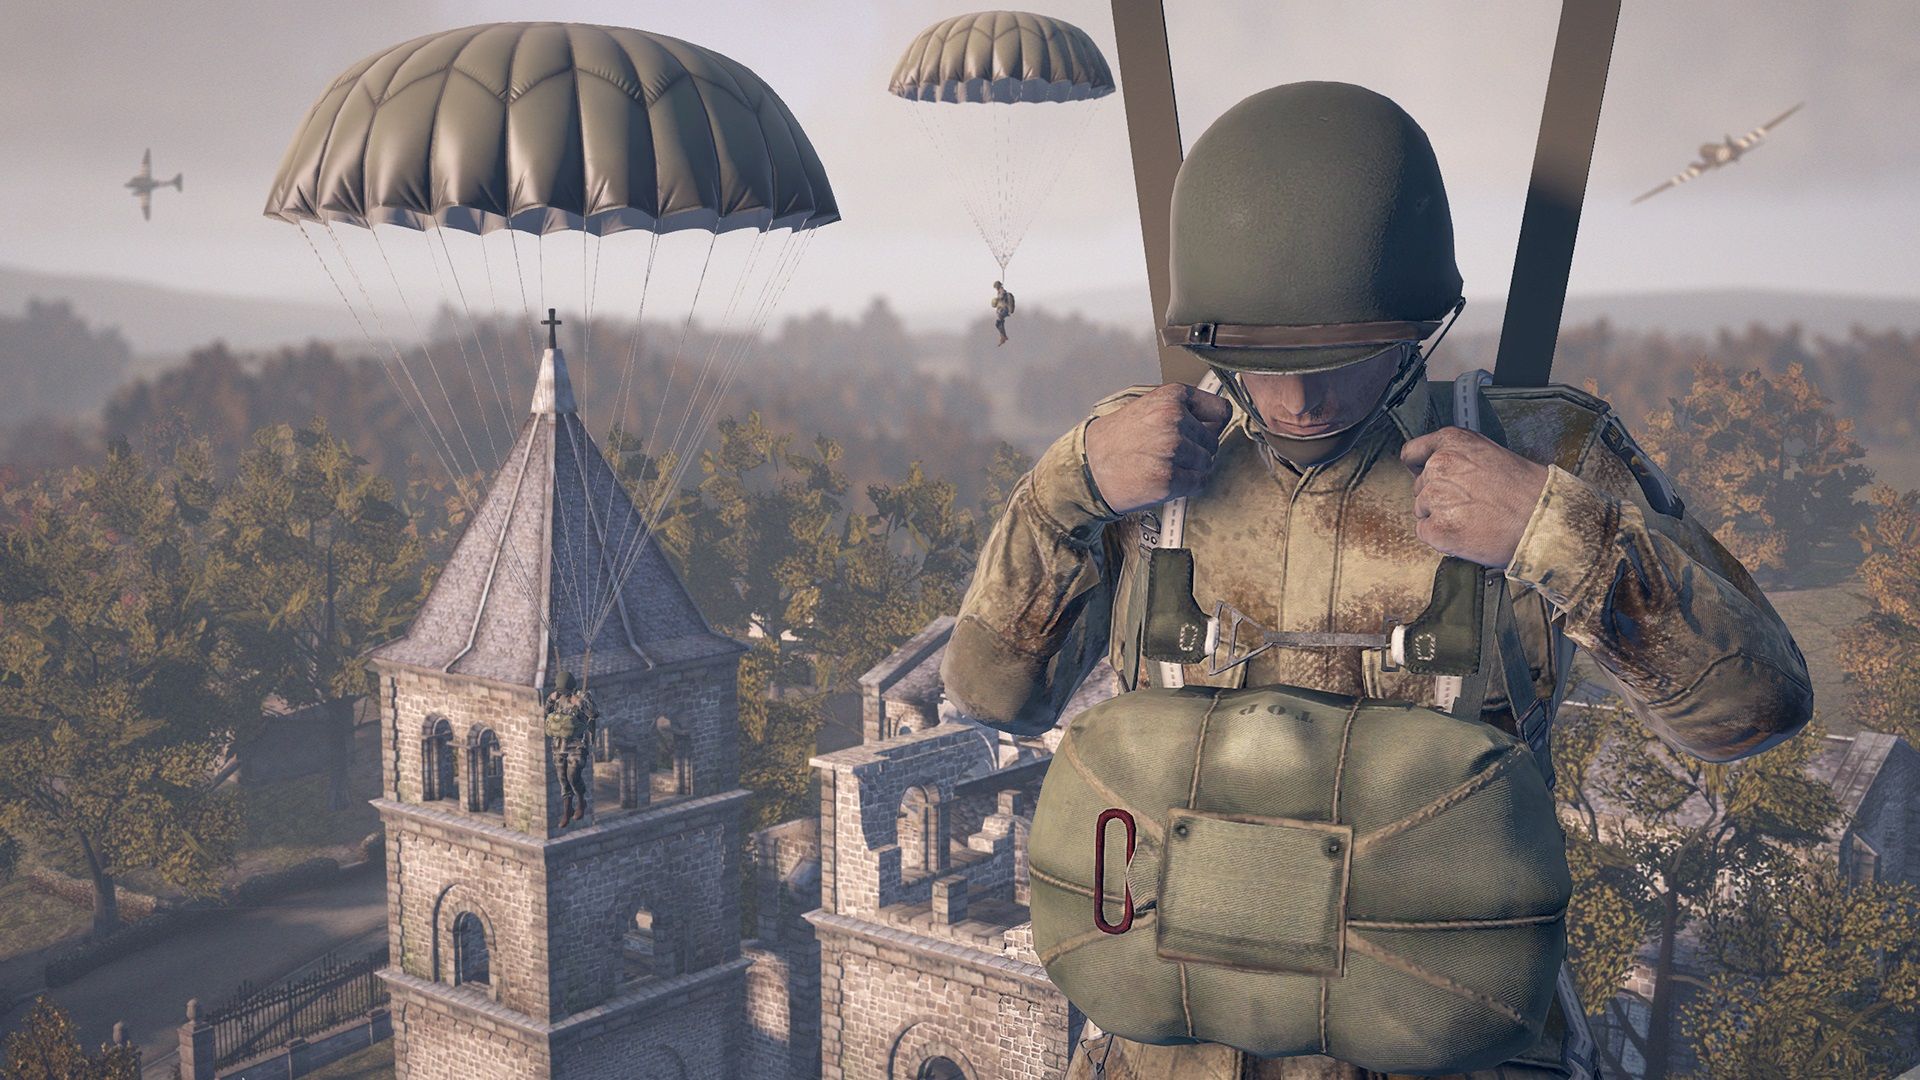 Best free PC games: Heroes and Generals. Image shows soldiers parachuting down into battle.